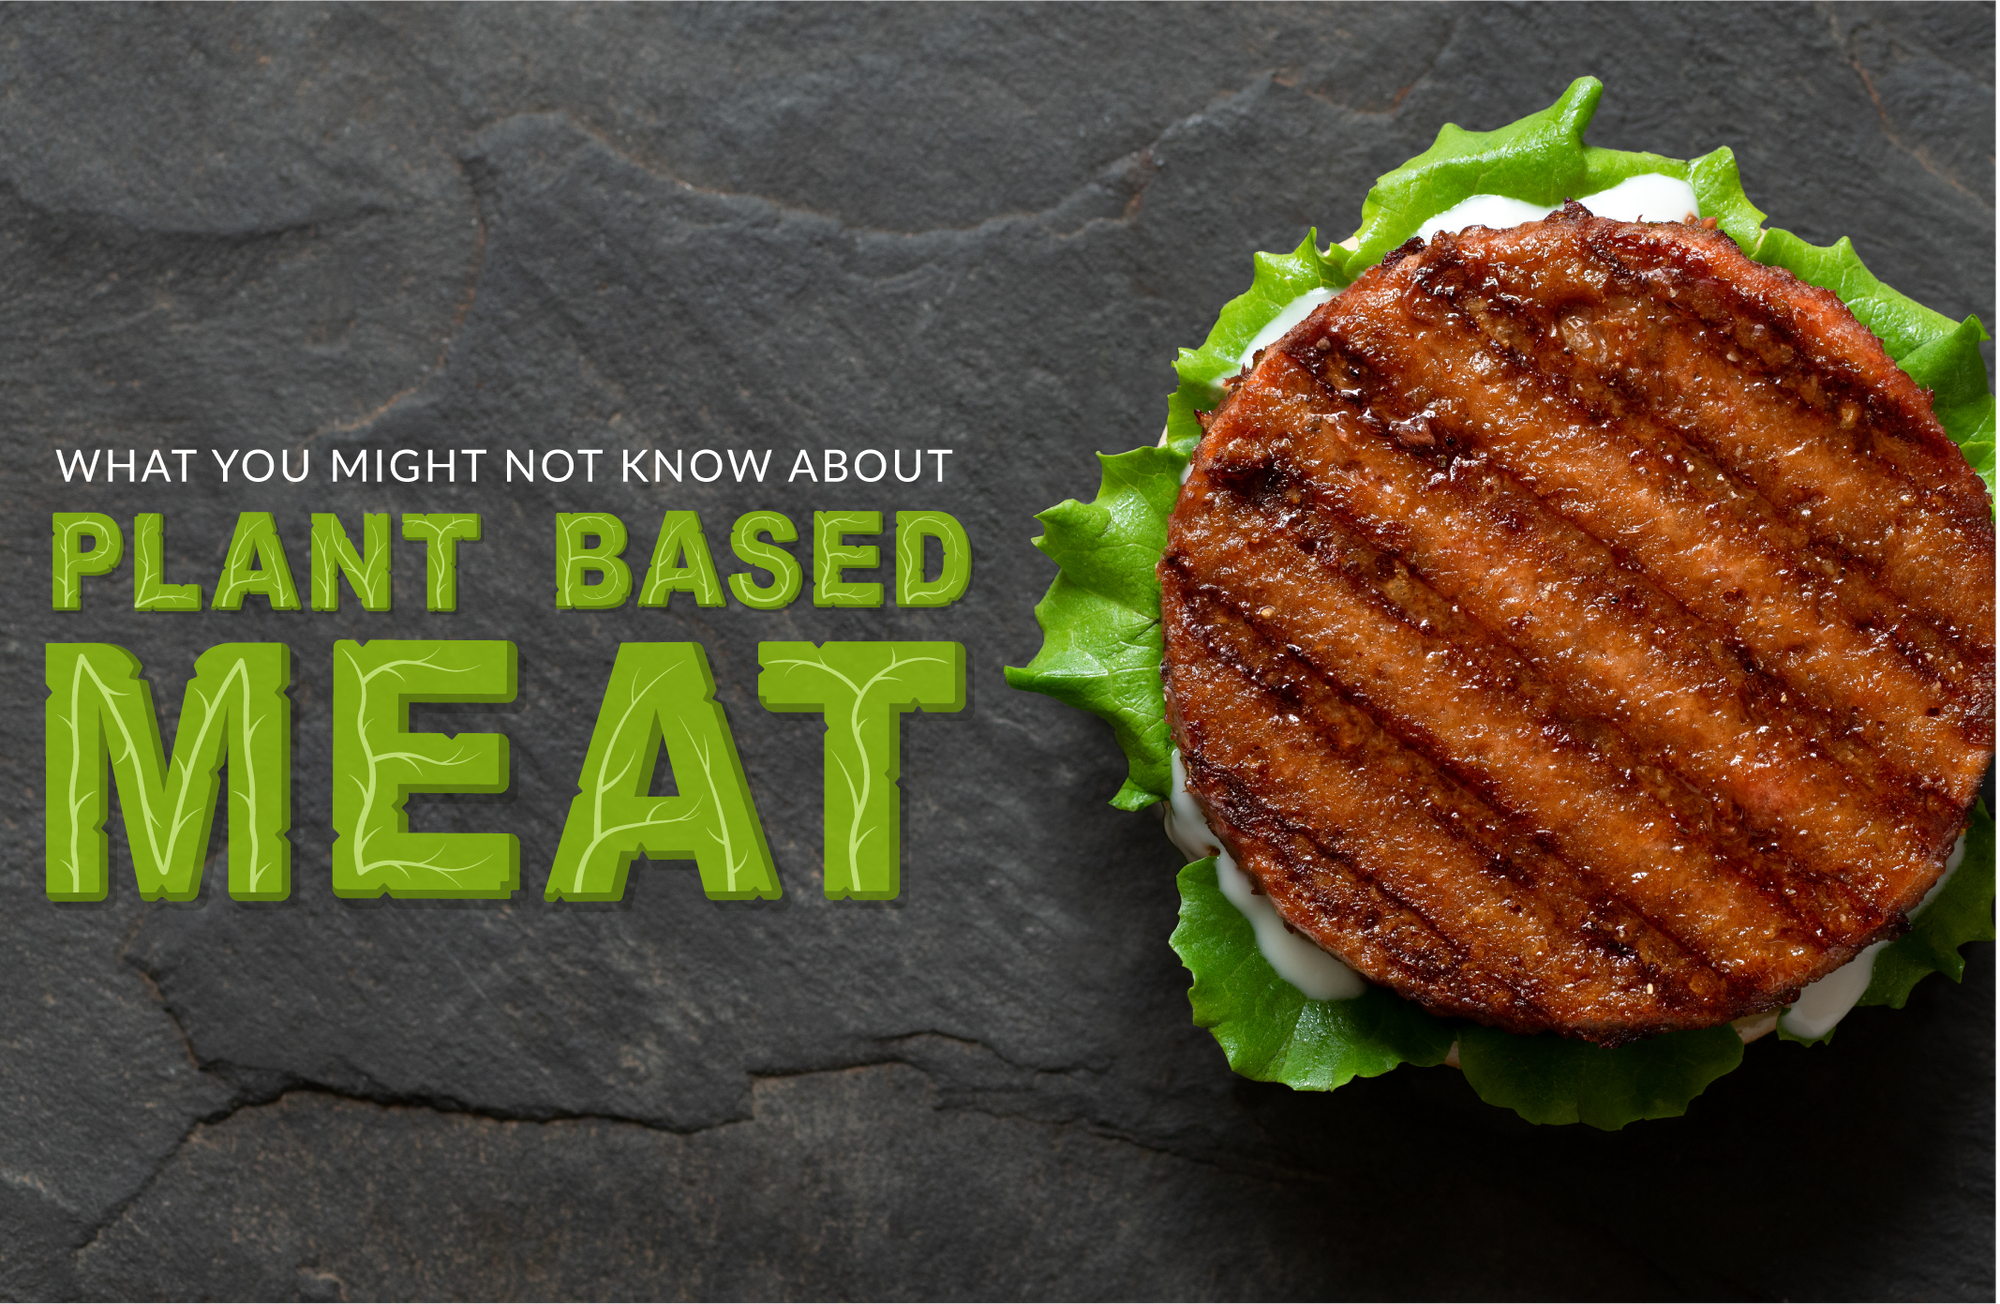 What You Might Not Know about Plant-Based Meat